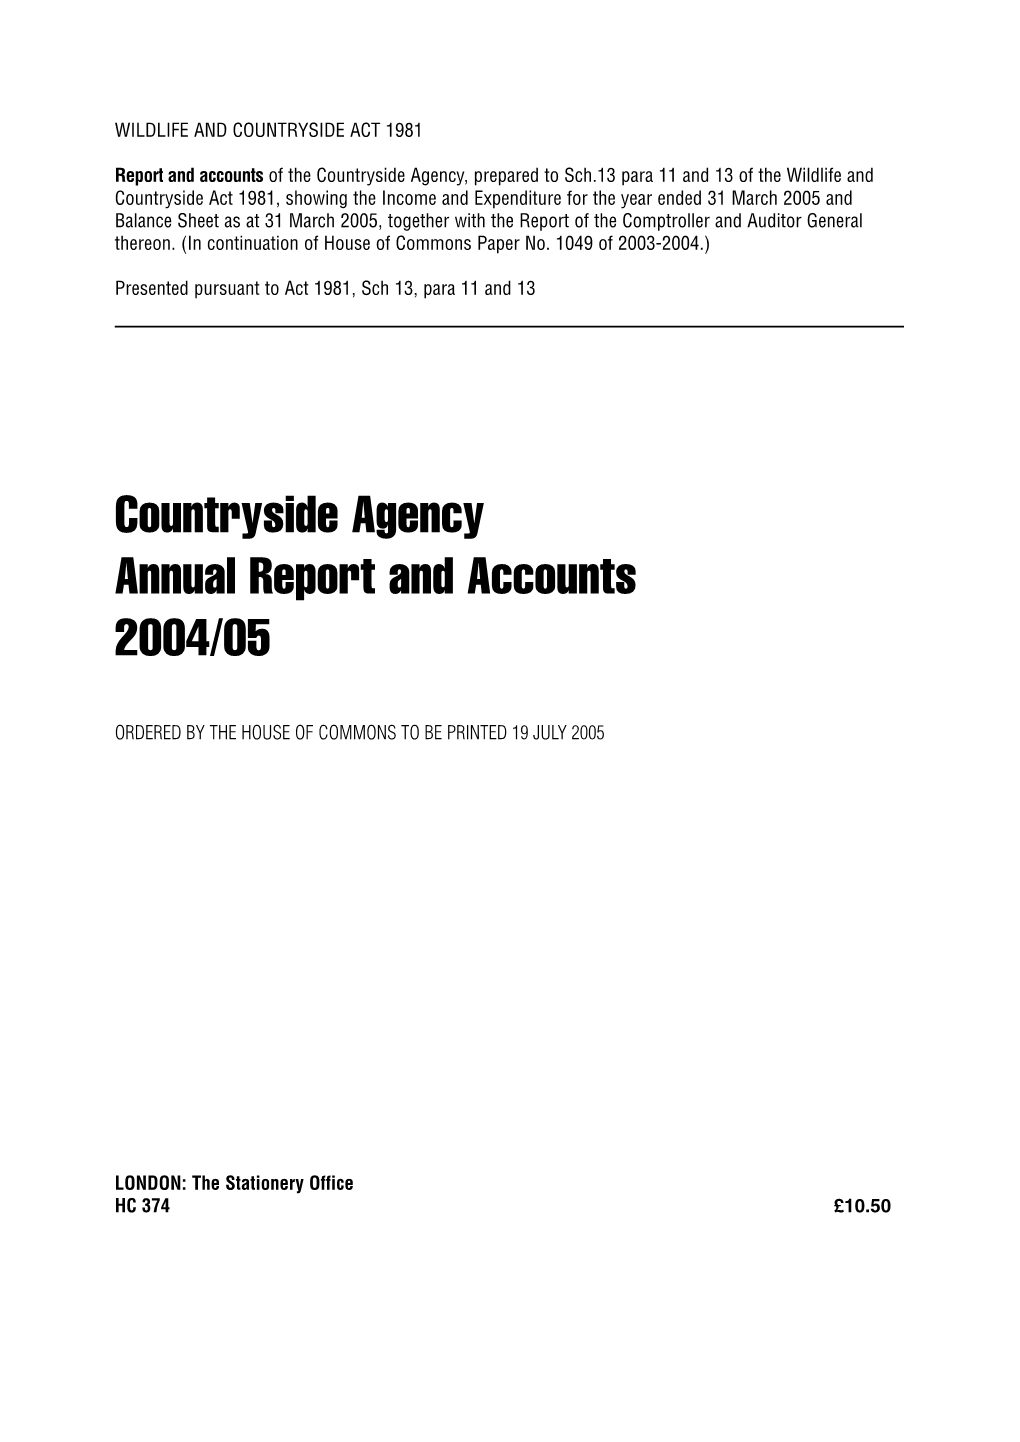 Countryside Agency Annual Report and Accounts 2004/05 HC